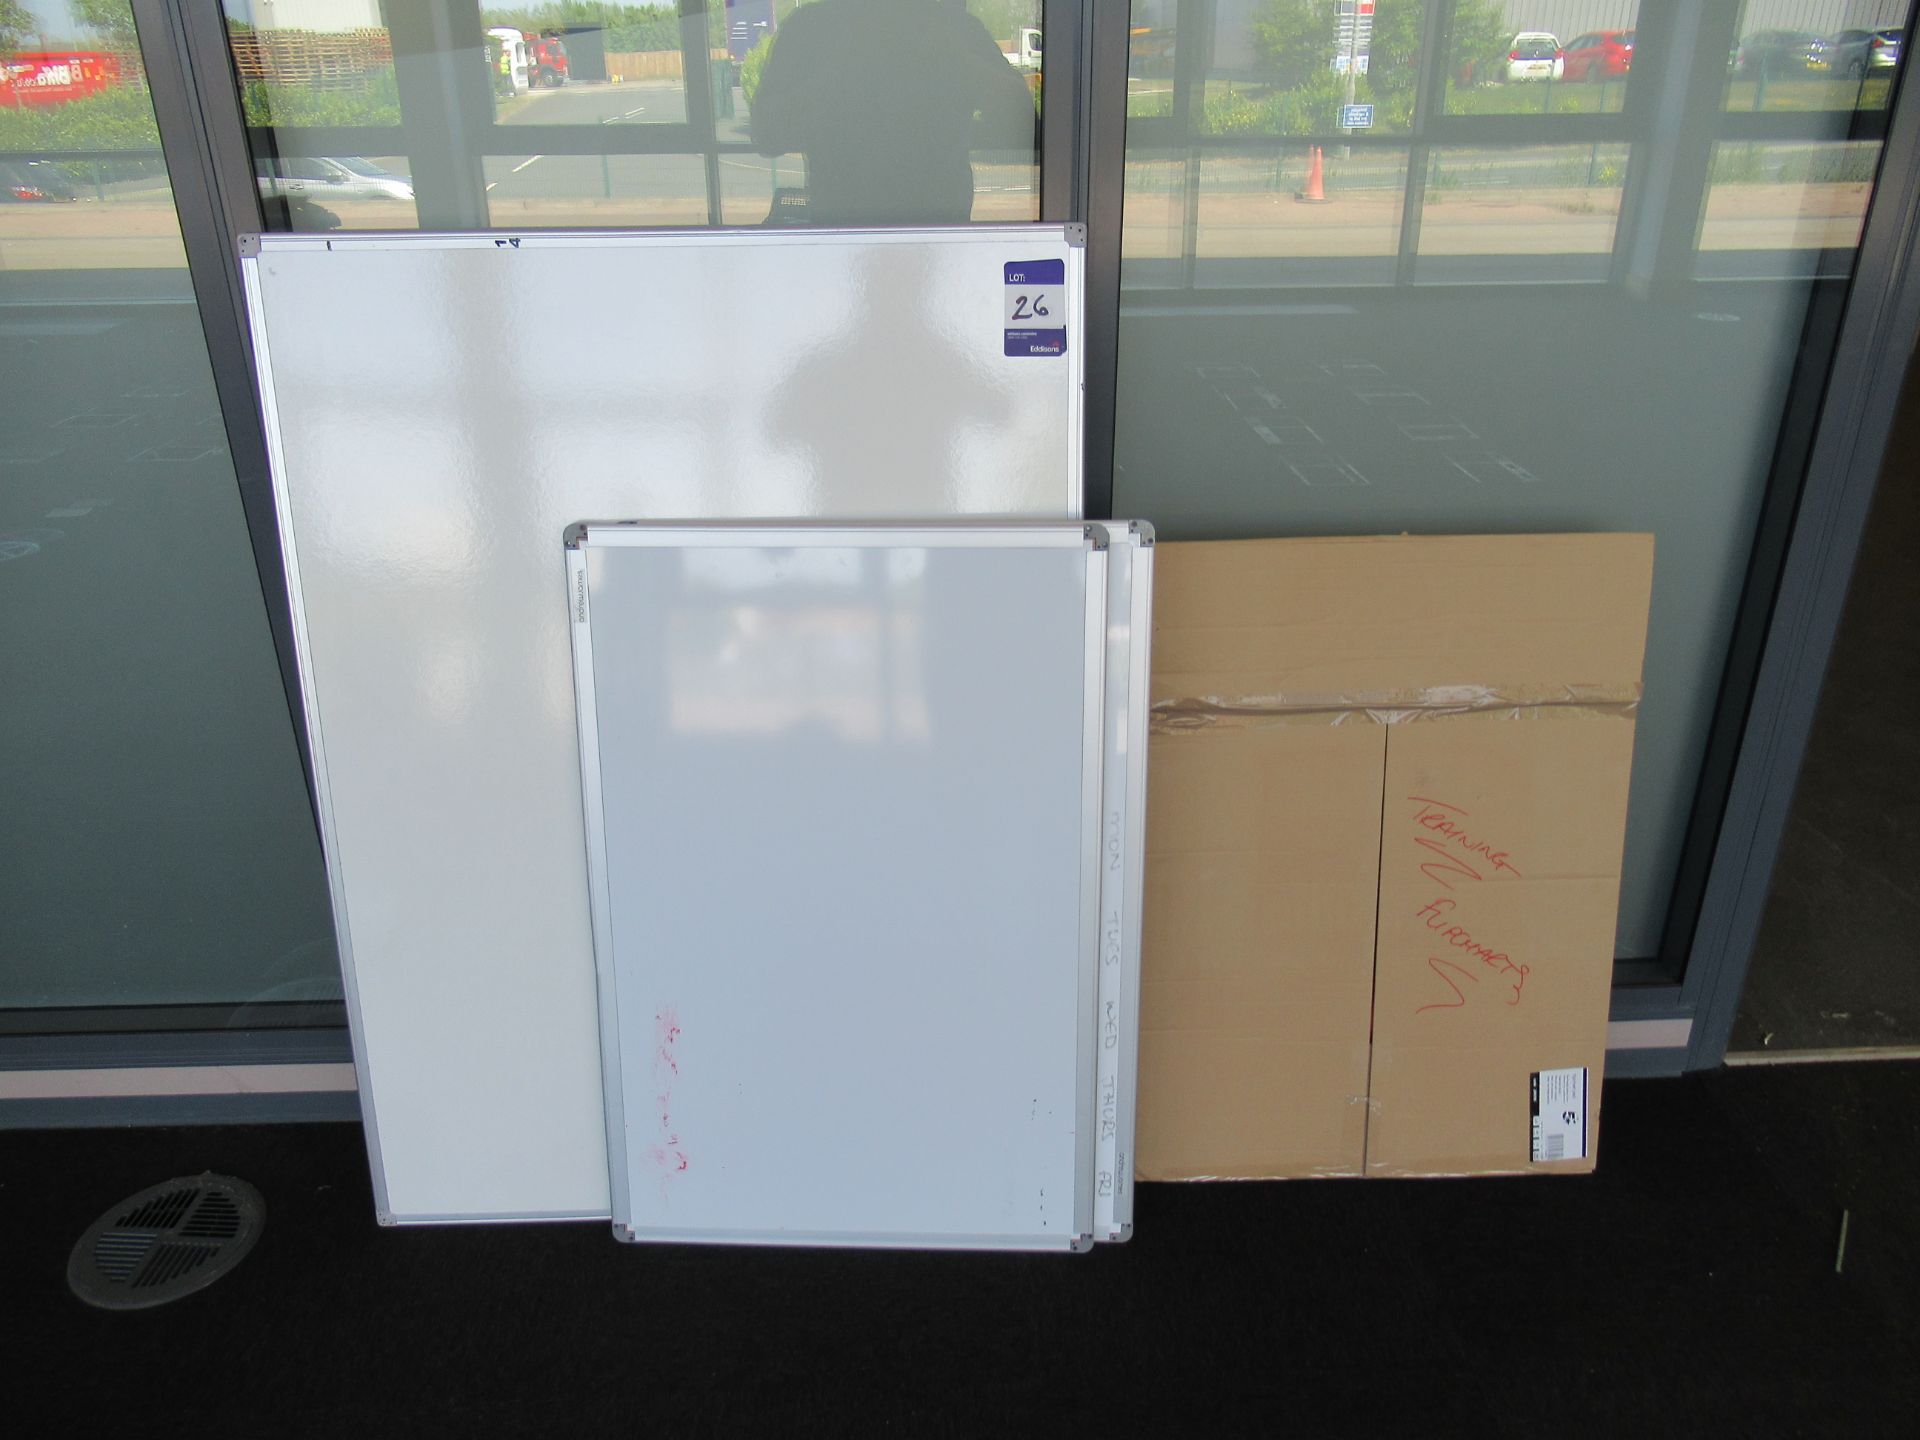 3 Various White/Wipe Boards